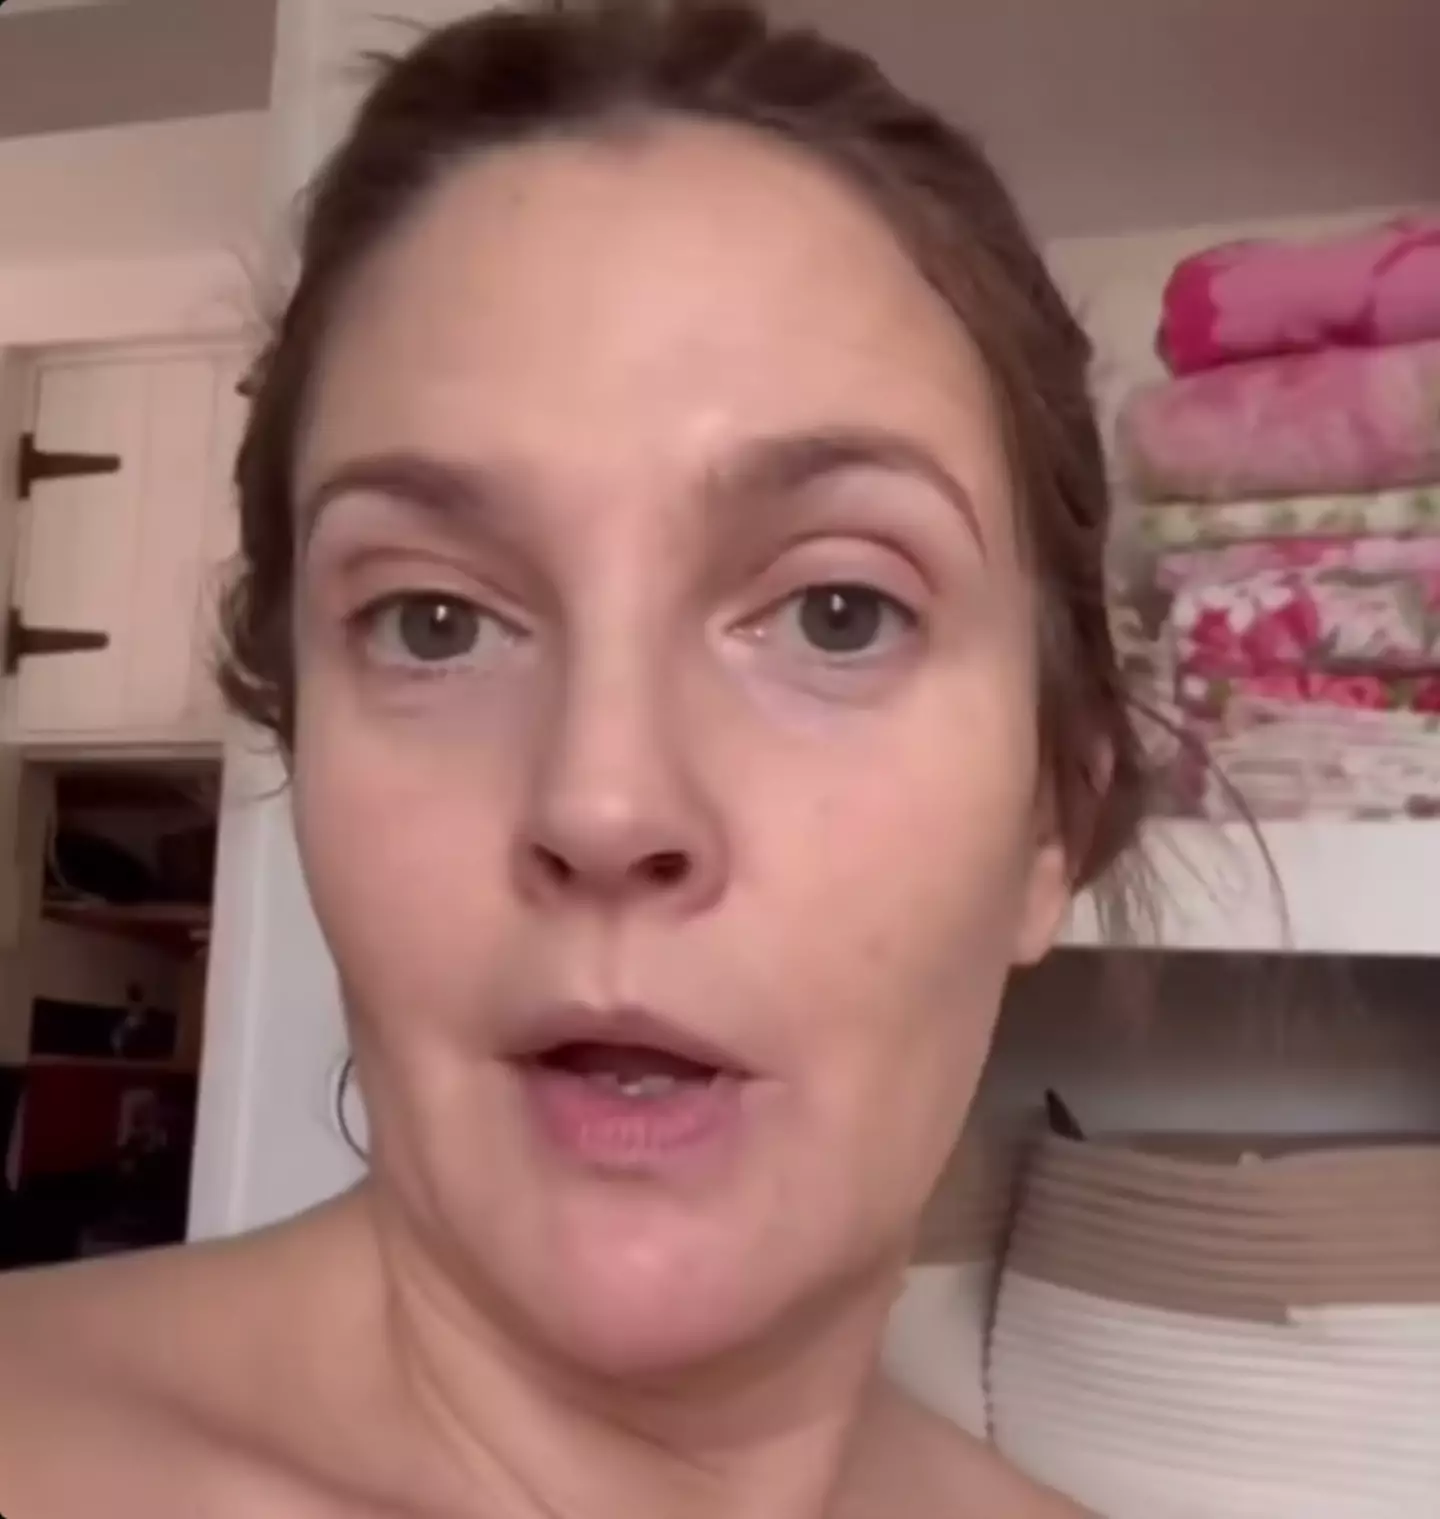 Drew Barrymore says she does not see shaving as self-care.